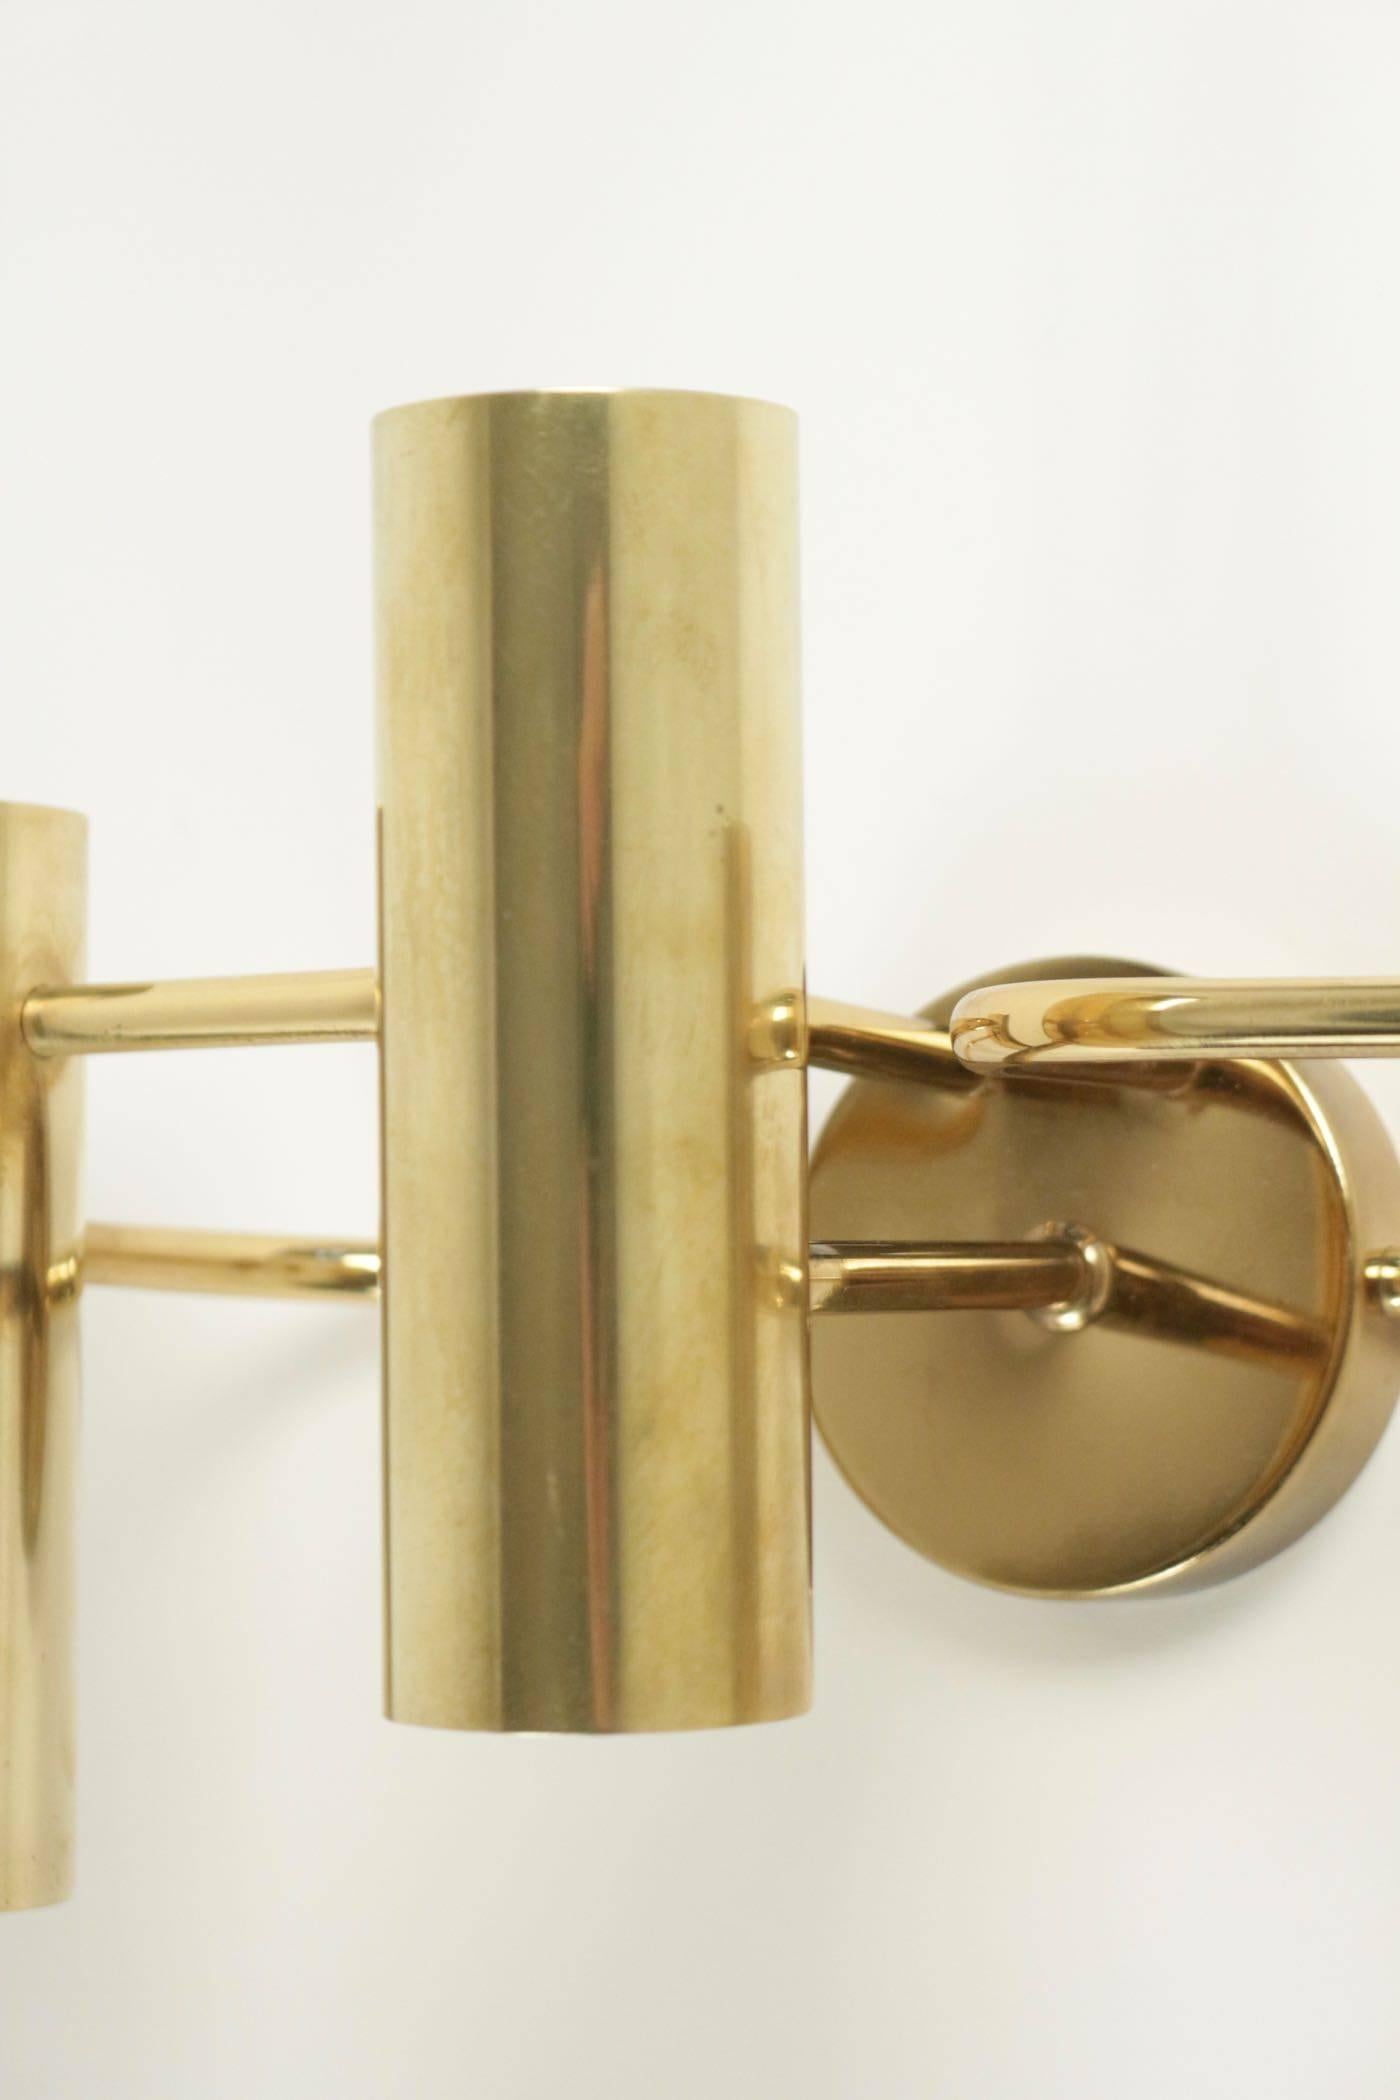 1960s pair of Gaetano Sciolari brass sconces.
The receptacles for three bulbs consist of a brass cylinder with a brown patina effect mounted on curved brass arms.
Round back plate.

Three bulbs per sconces.